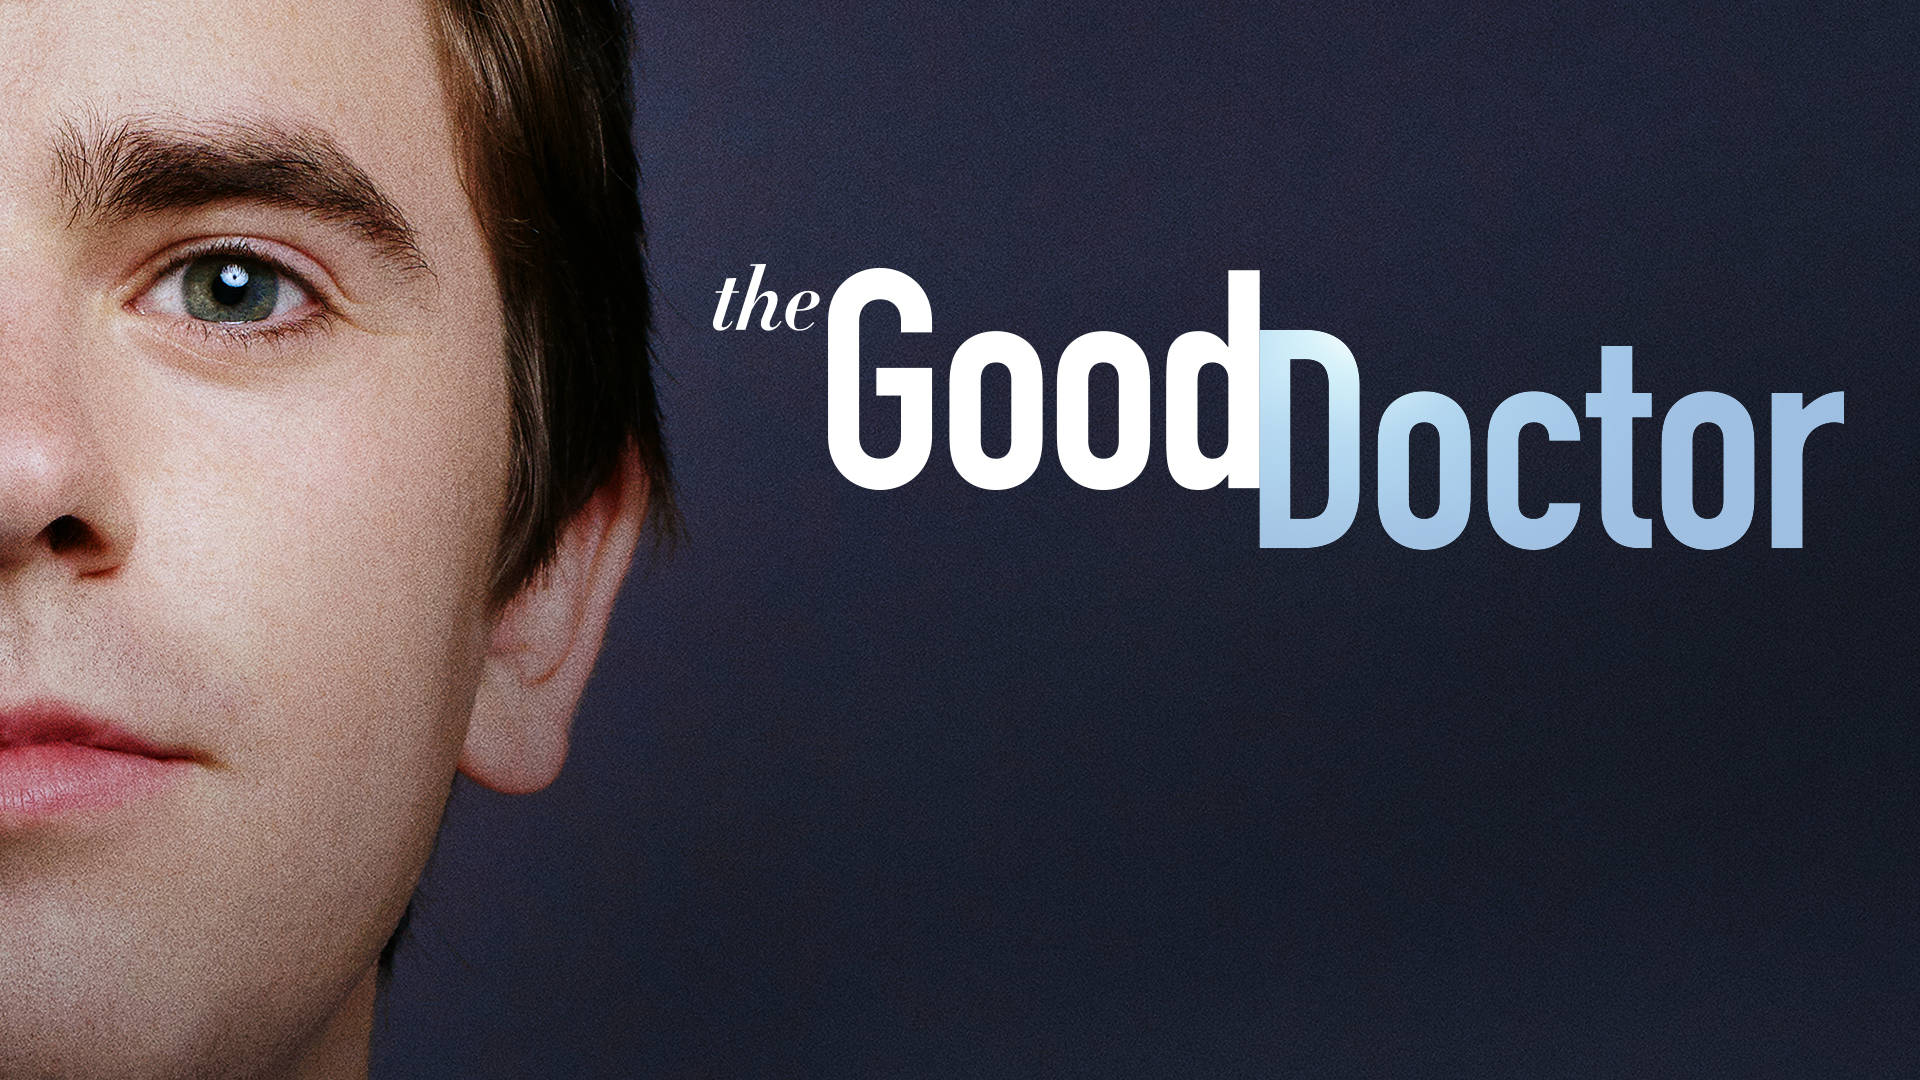 The Good Doctor Season 1 Poster Background